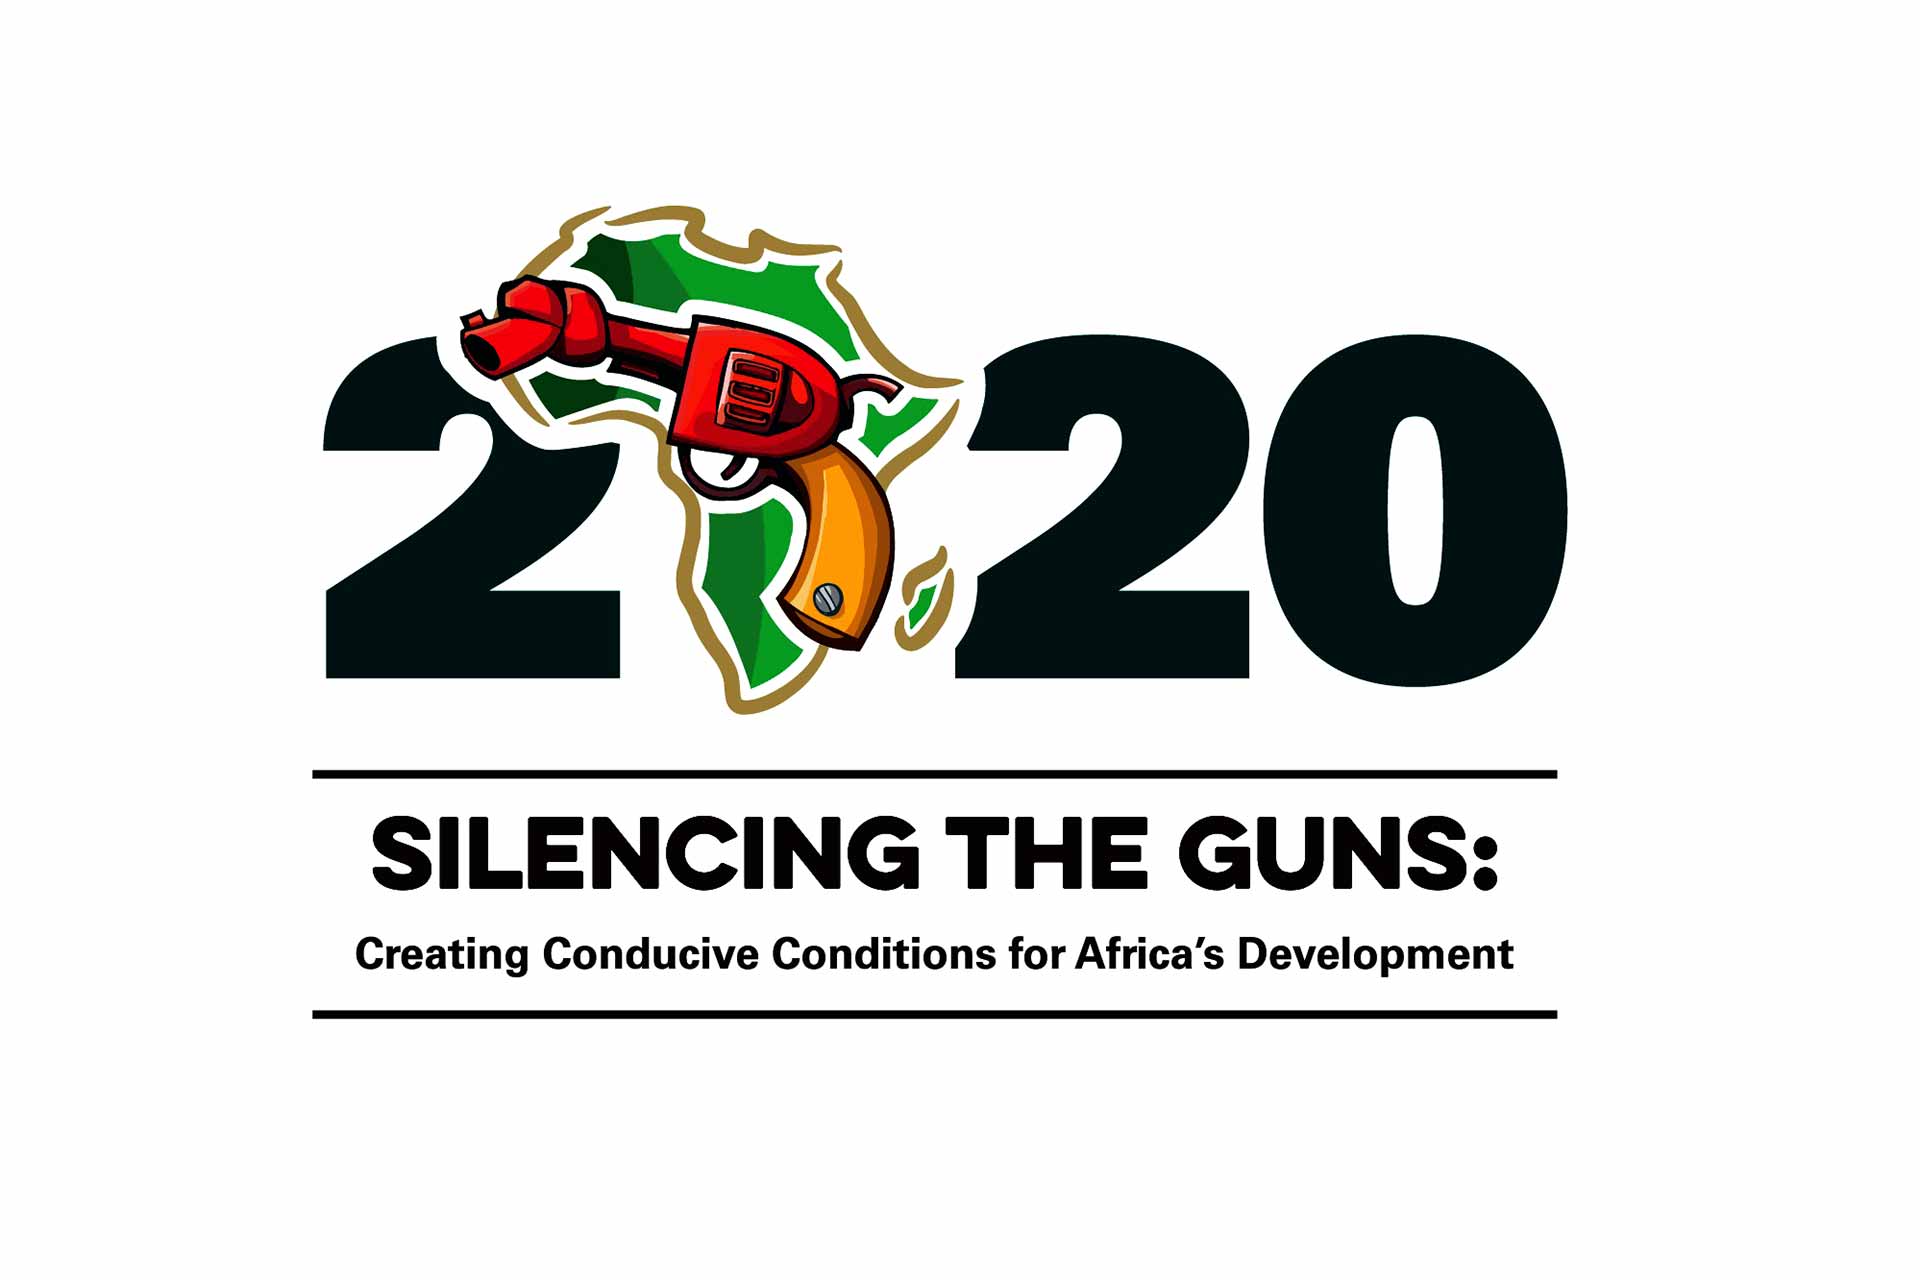 African Union - Silencing the guns in Africa